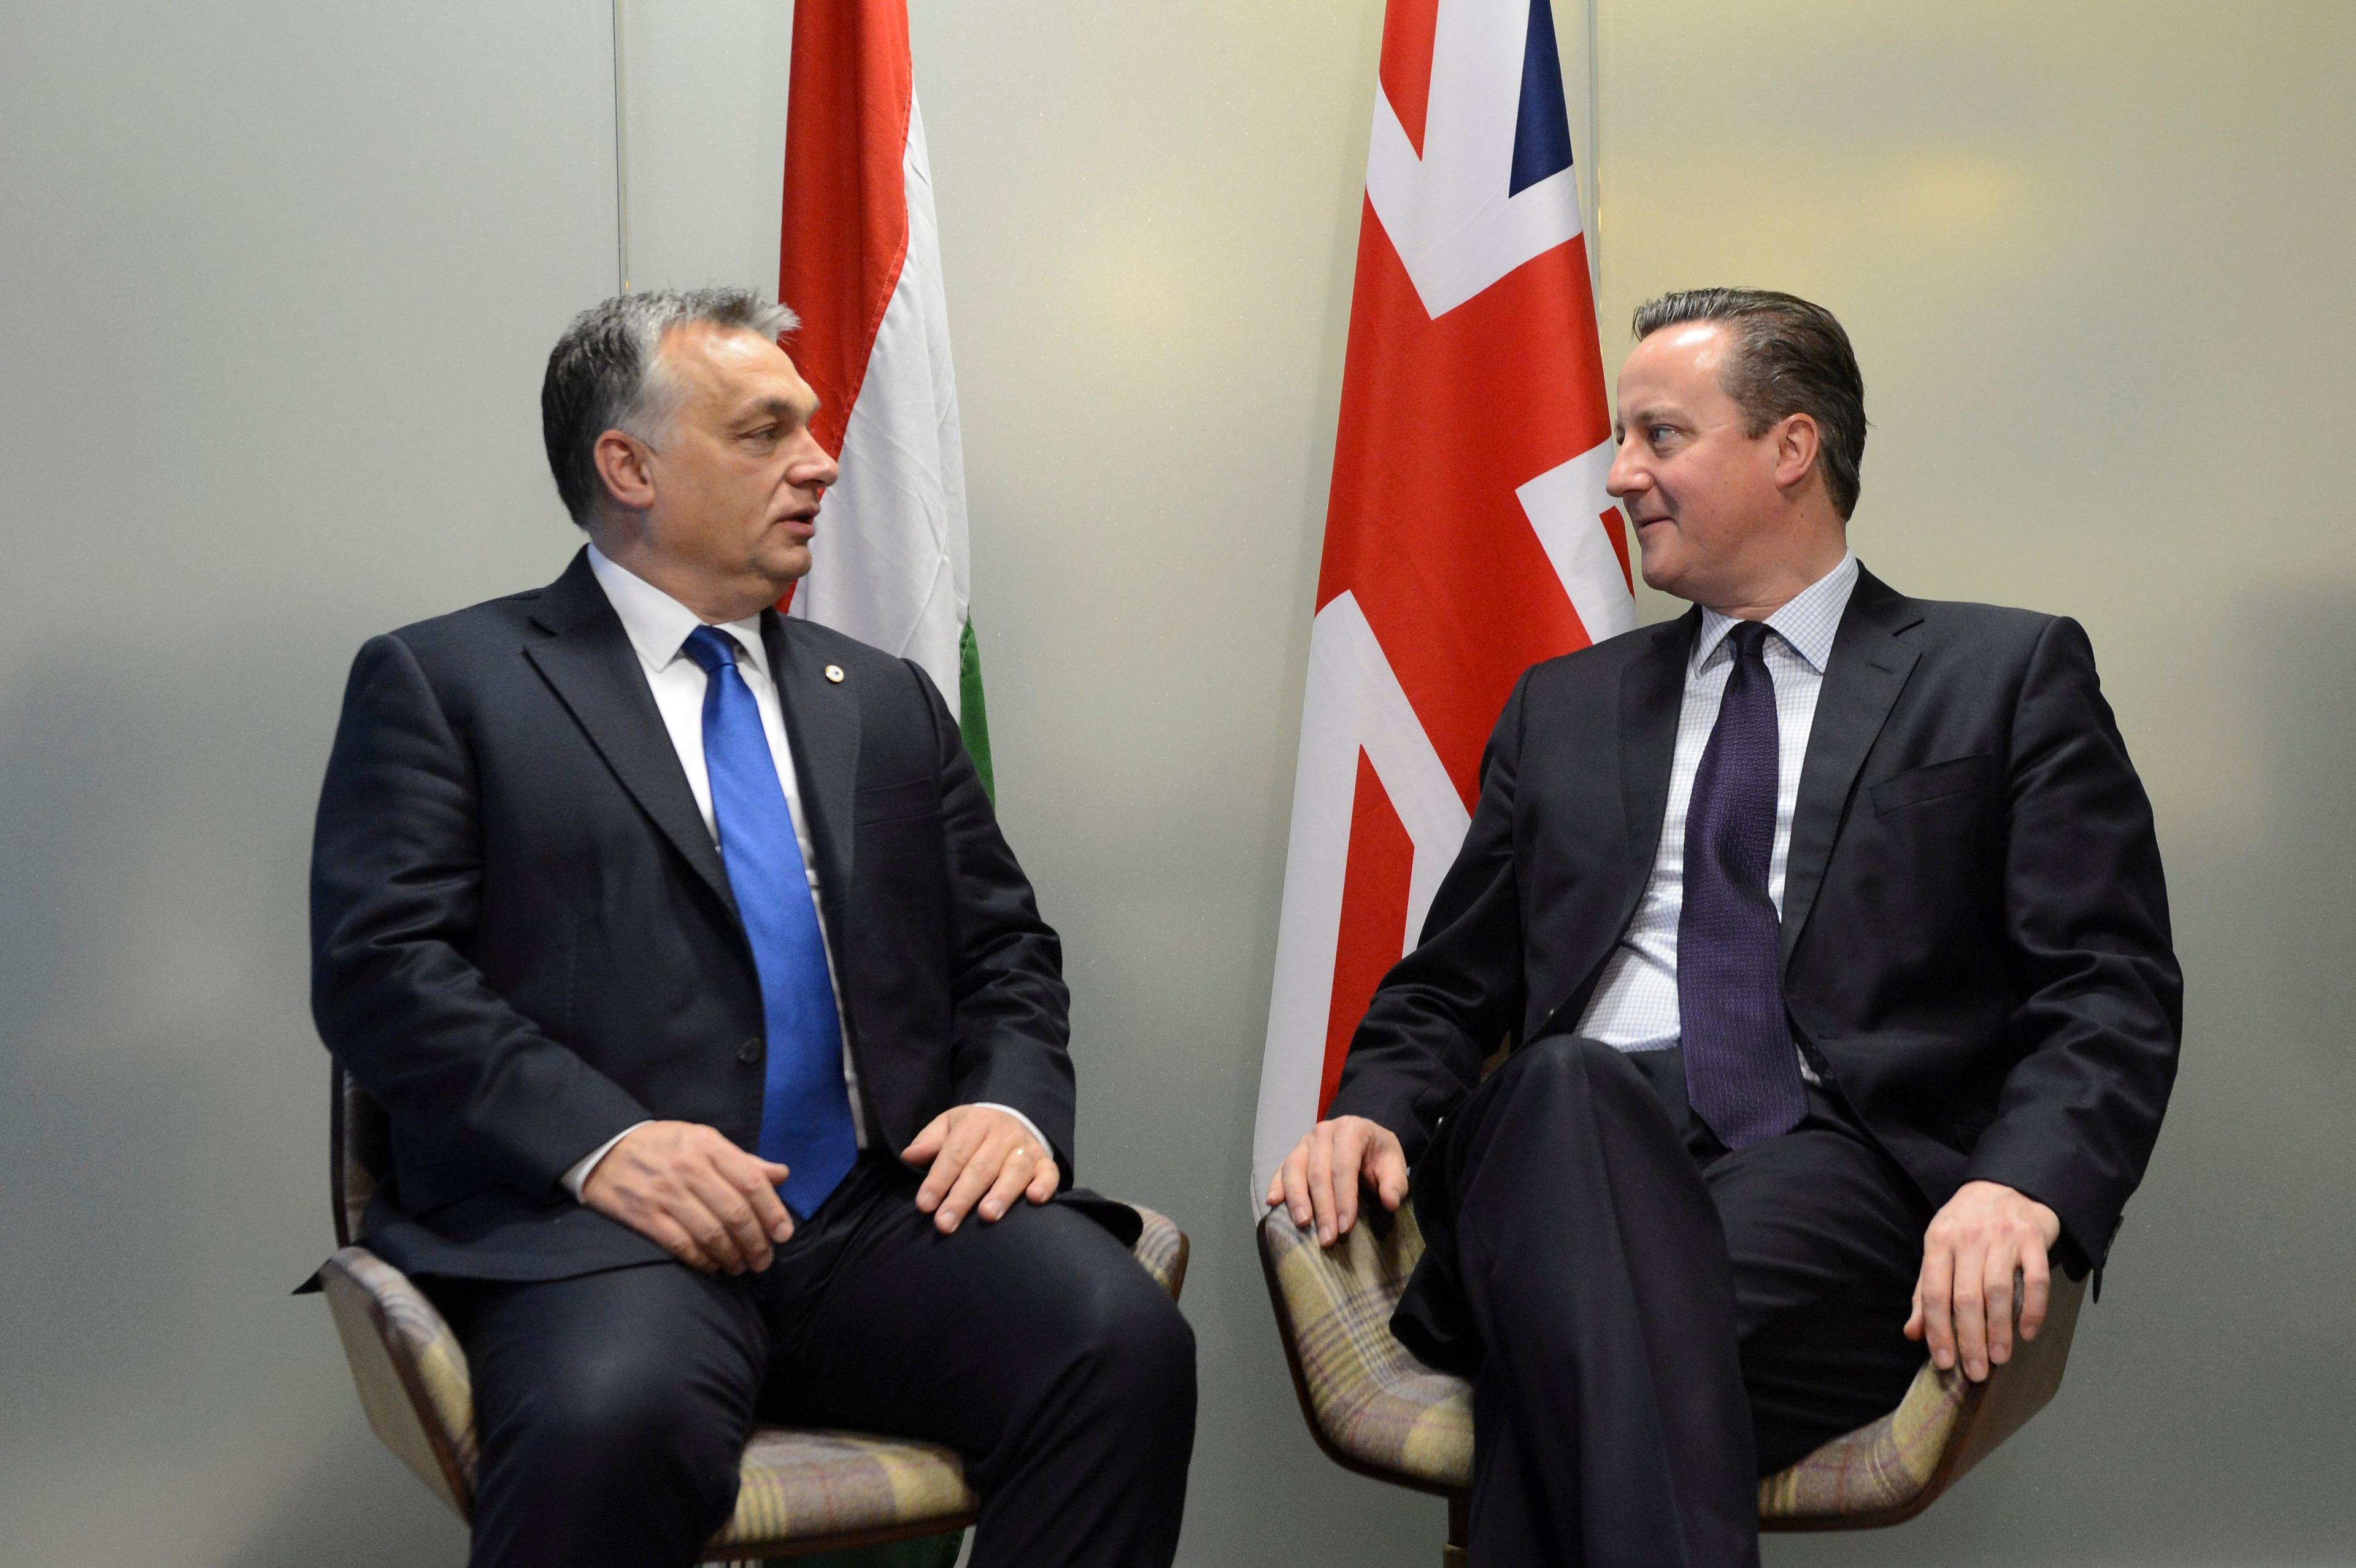 David Cameron holds a bilateral meeting with the Prime Minister of Hungary, Viktor Orban, on the second day of the EU Council in Brussels